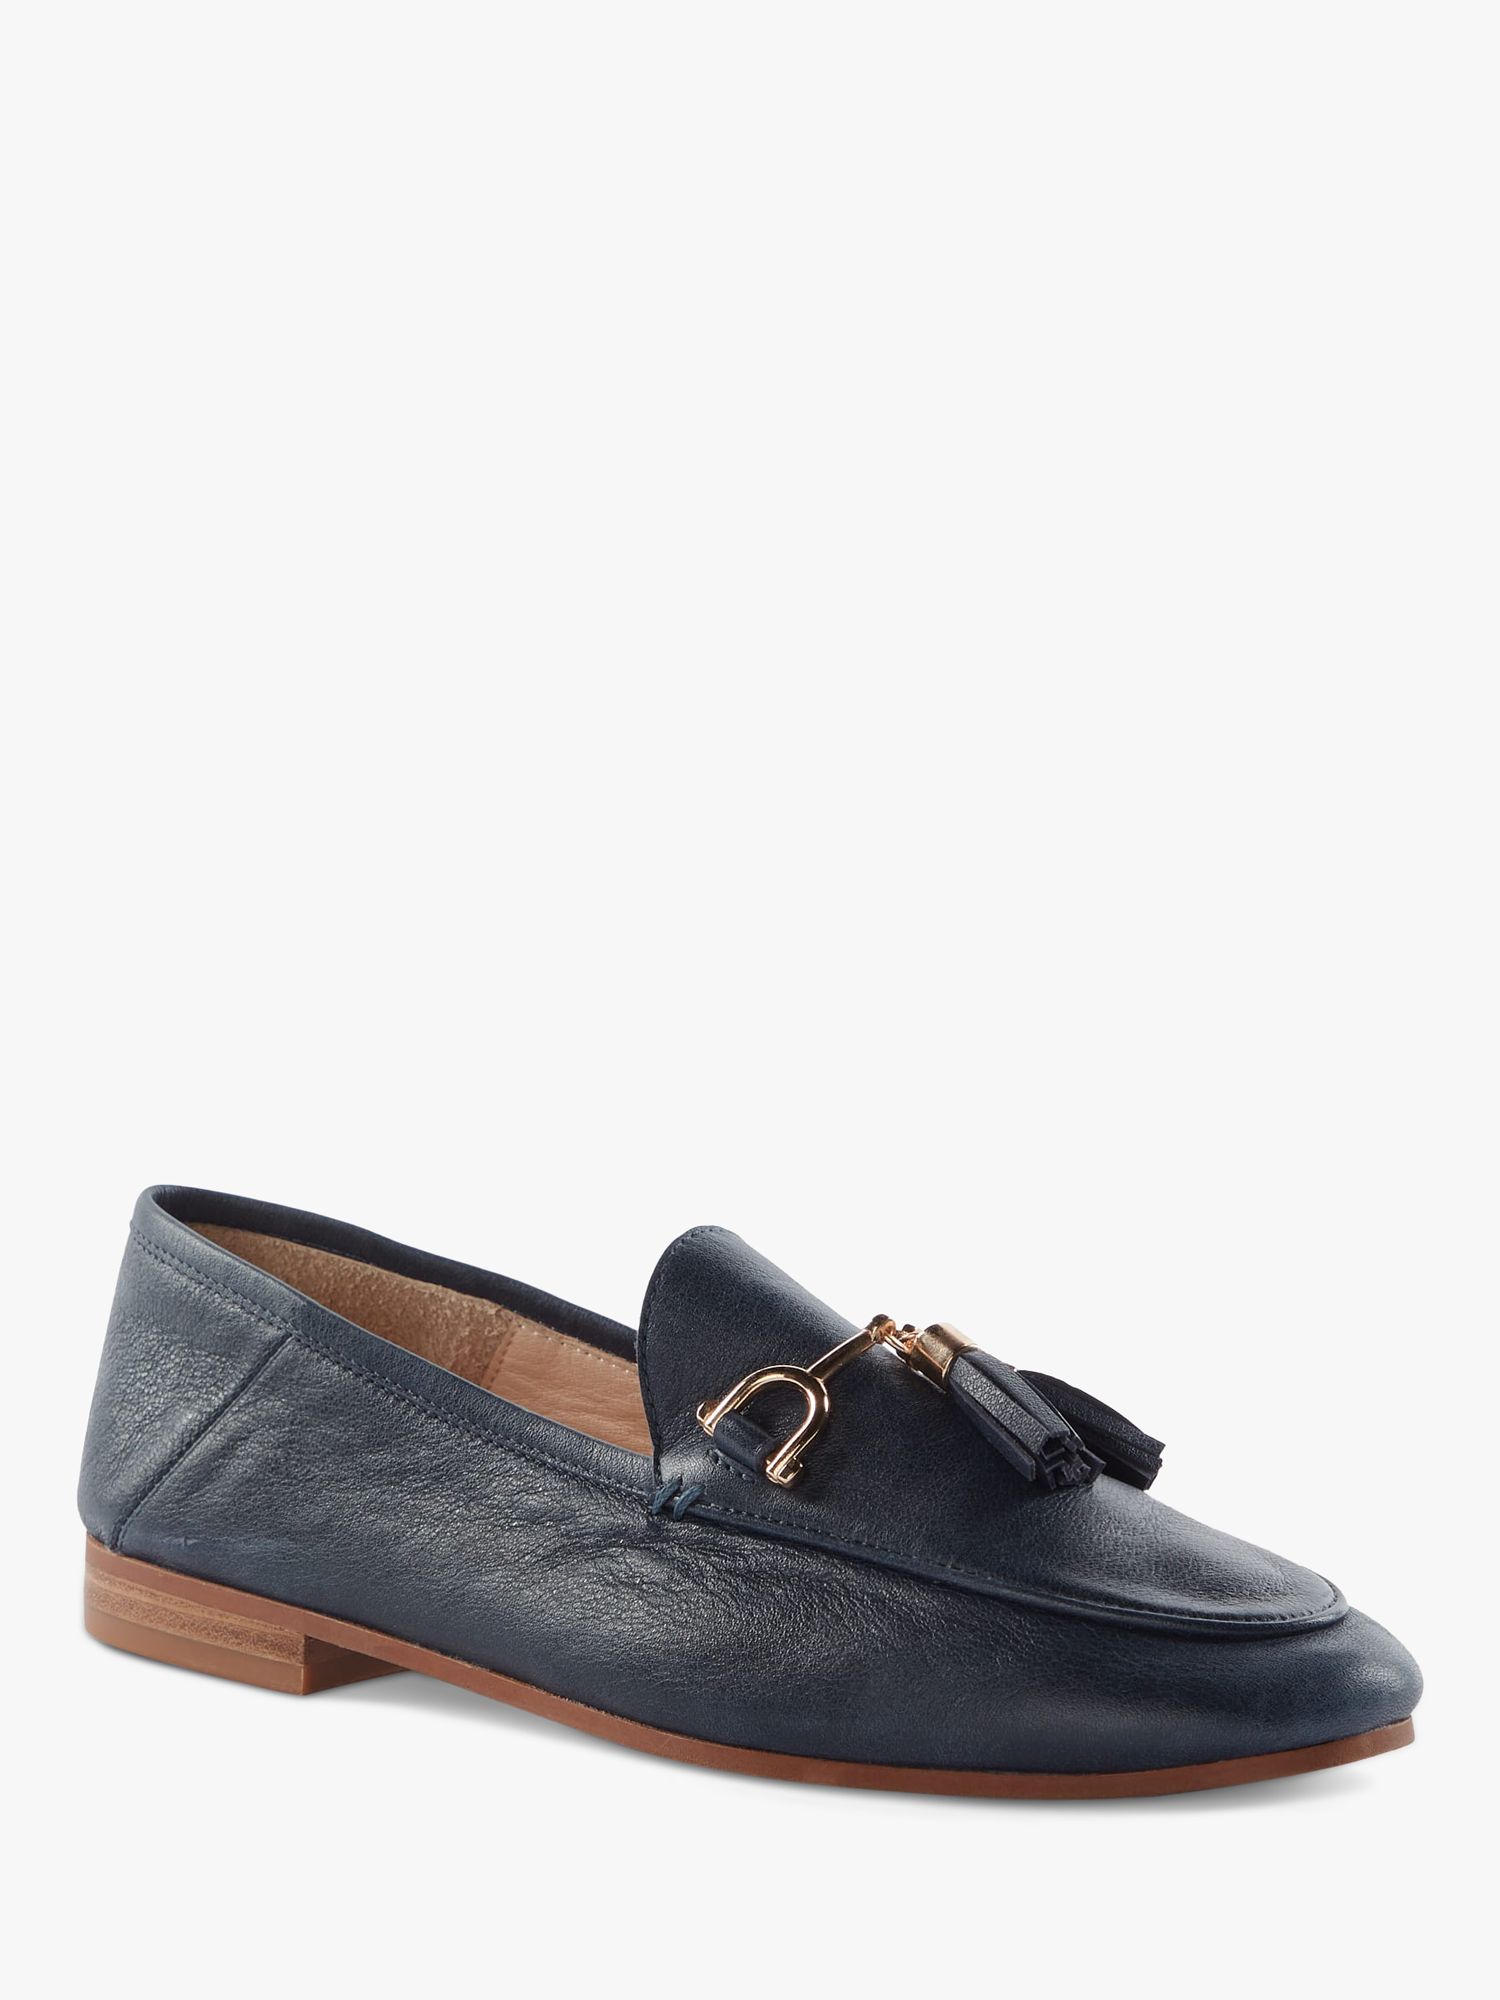 Dune Graysons Leather Loafers, Navy at John Lewis & Partners